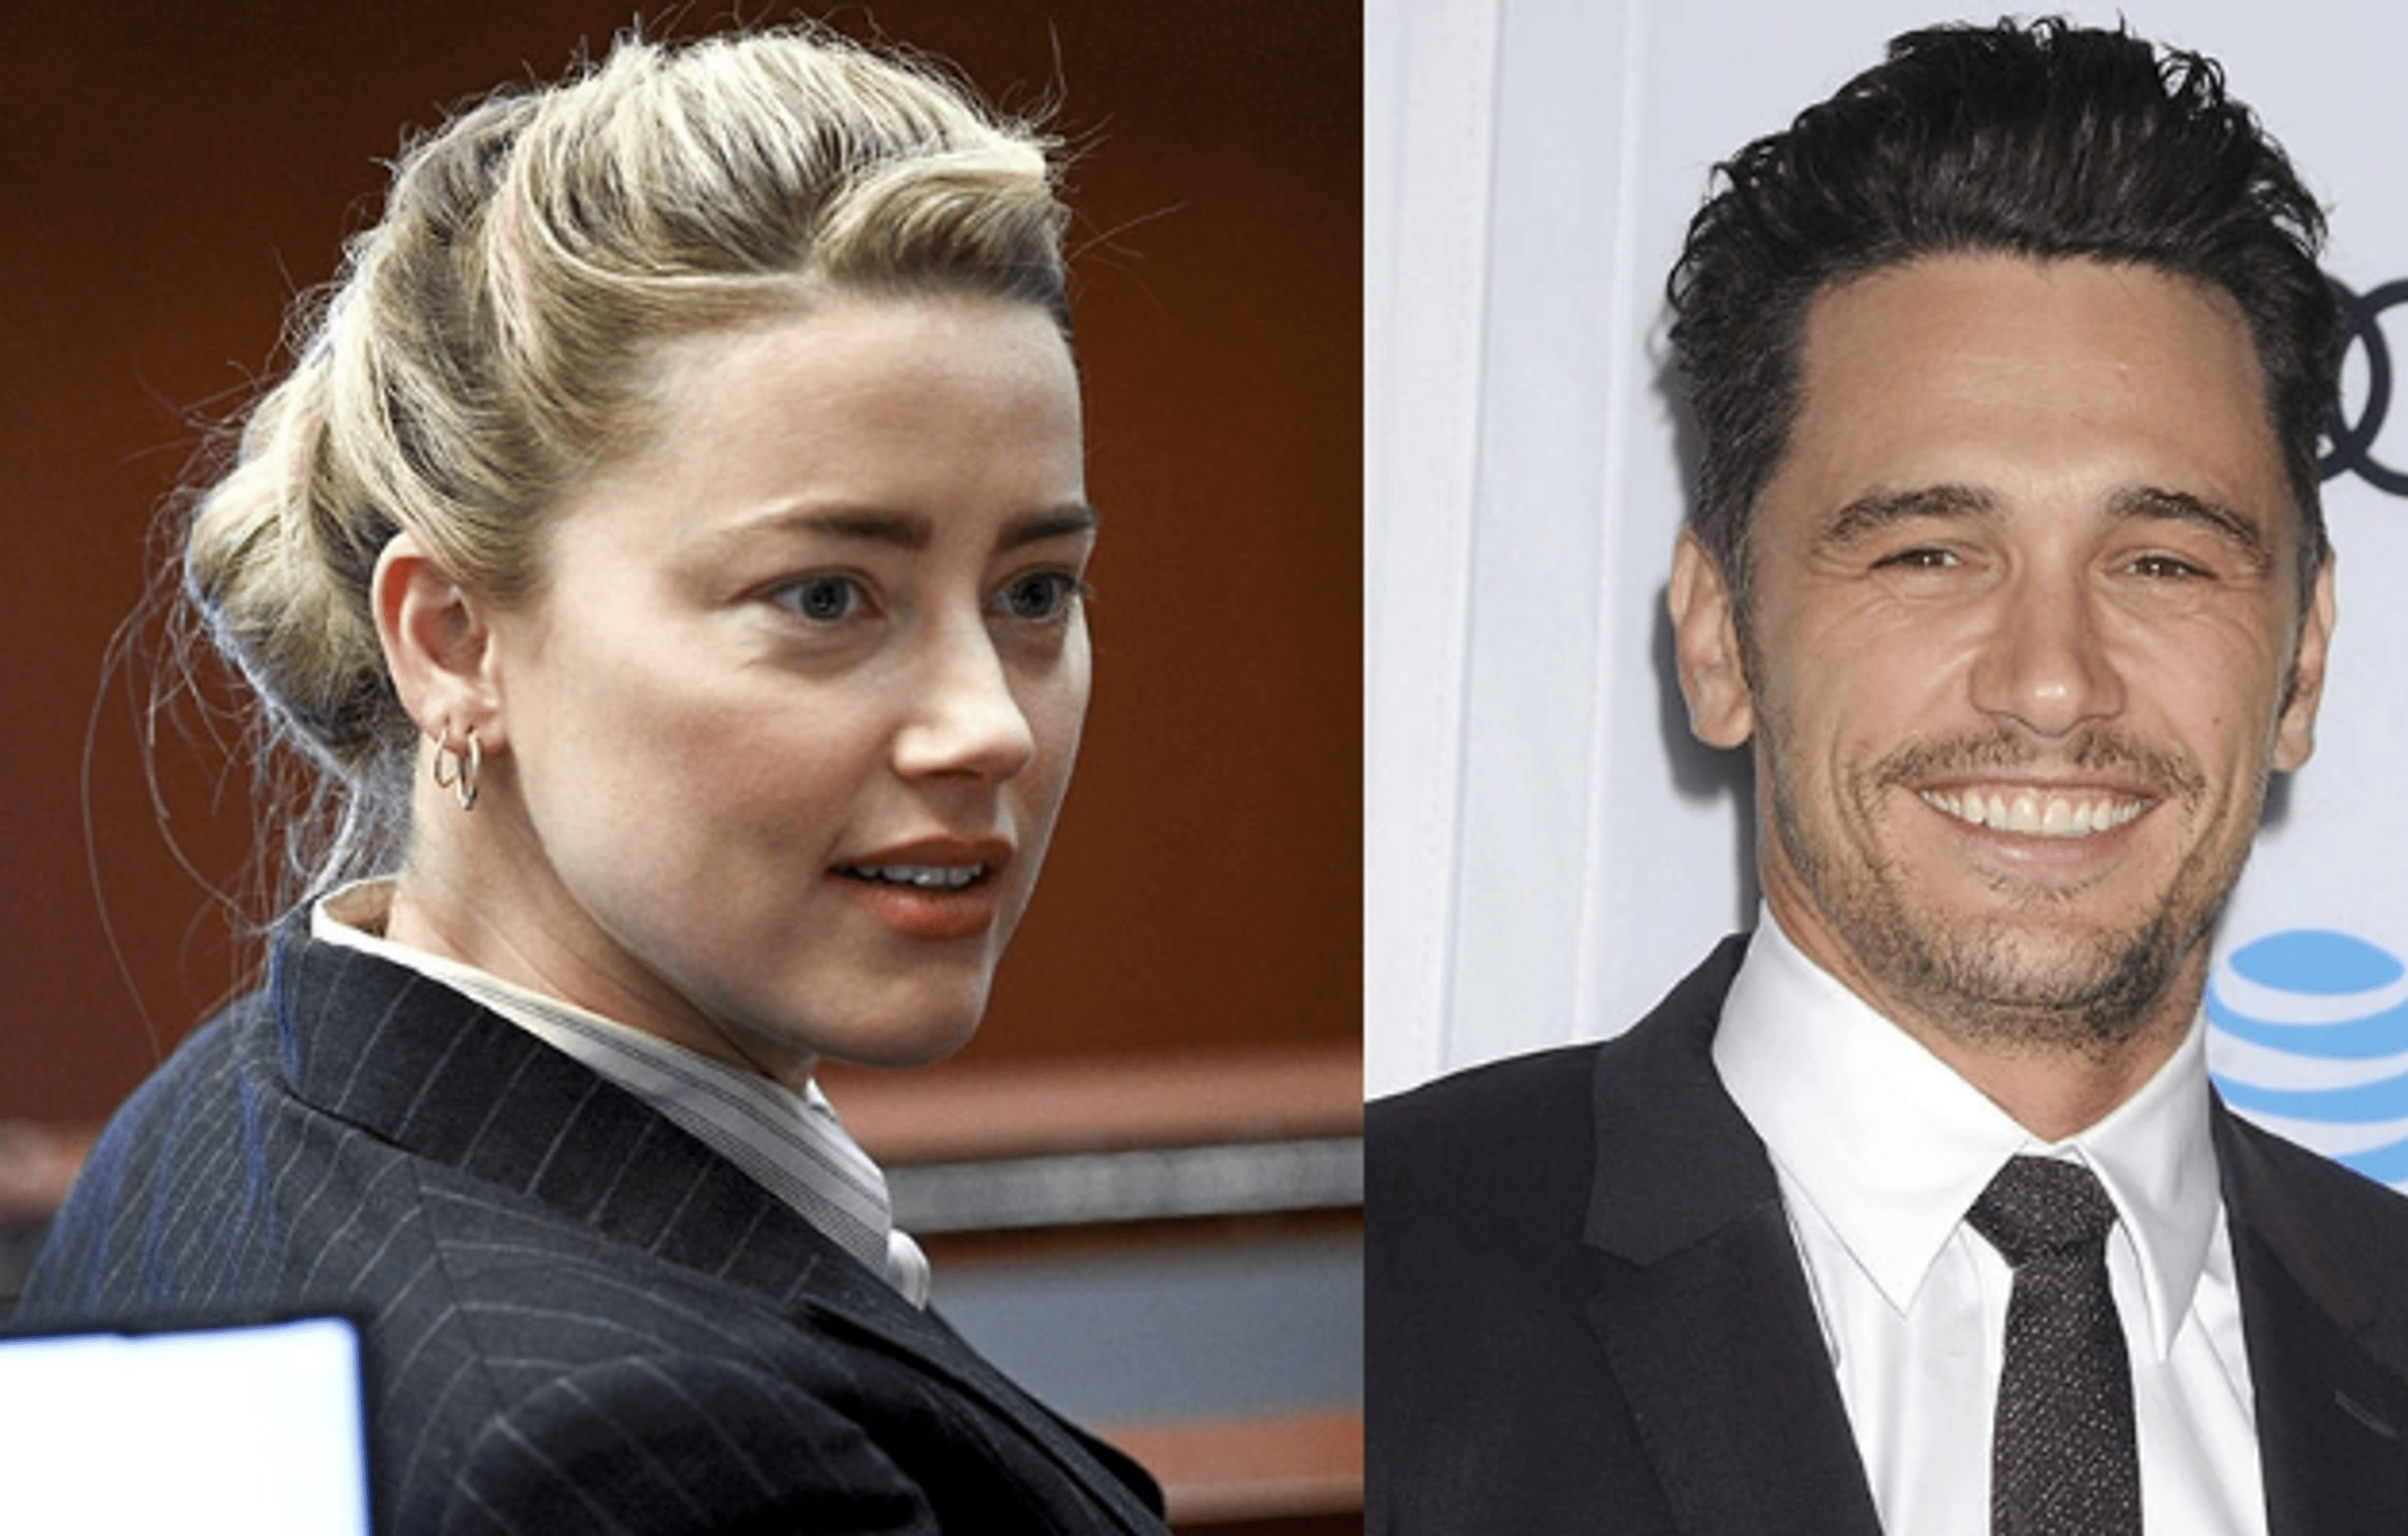 Amber Heard had commented on the rumors about the affair with James Franco when she was married